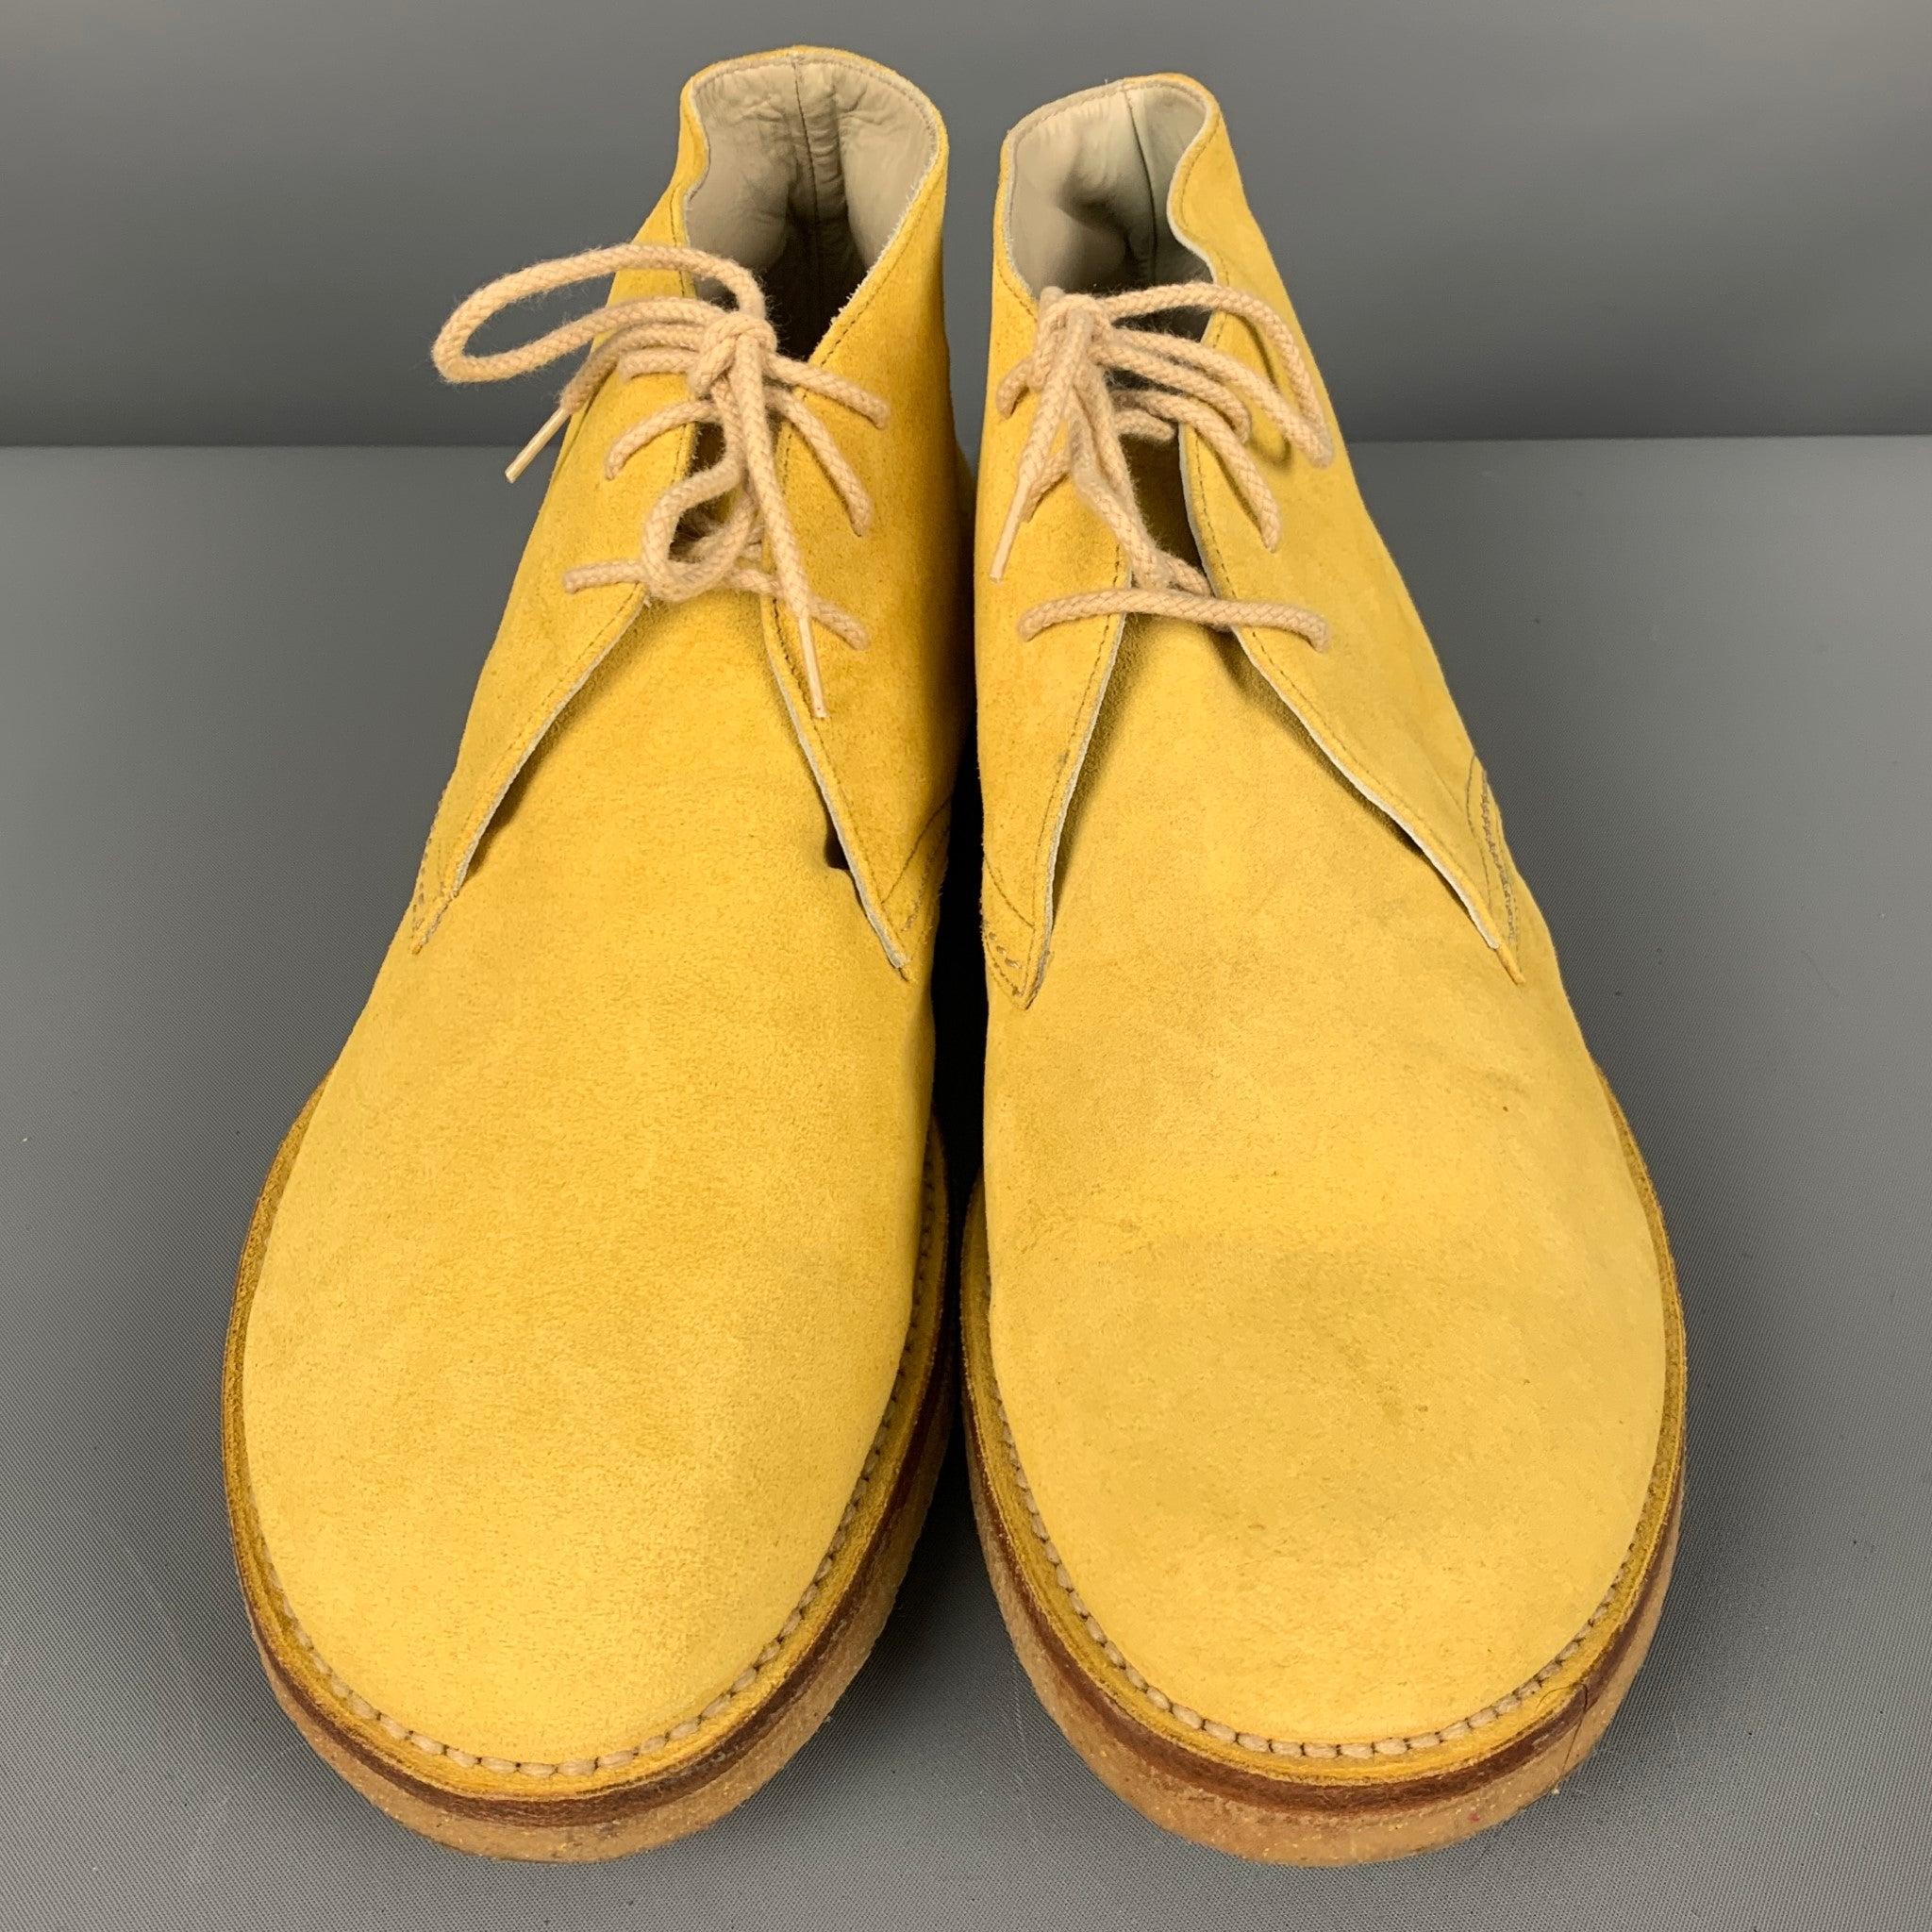 Men's JIL SANDER Size 9 Yellow Suede Ankle Lace Up Shoes For Sale